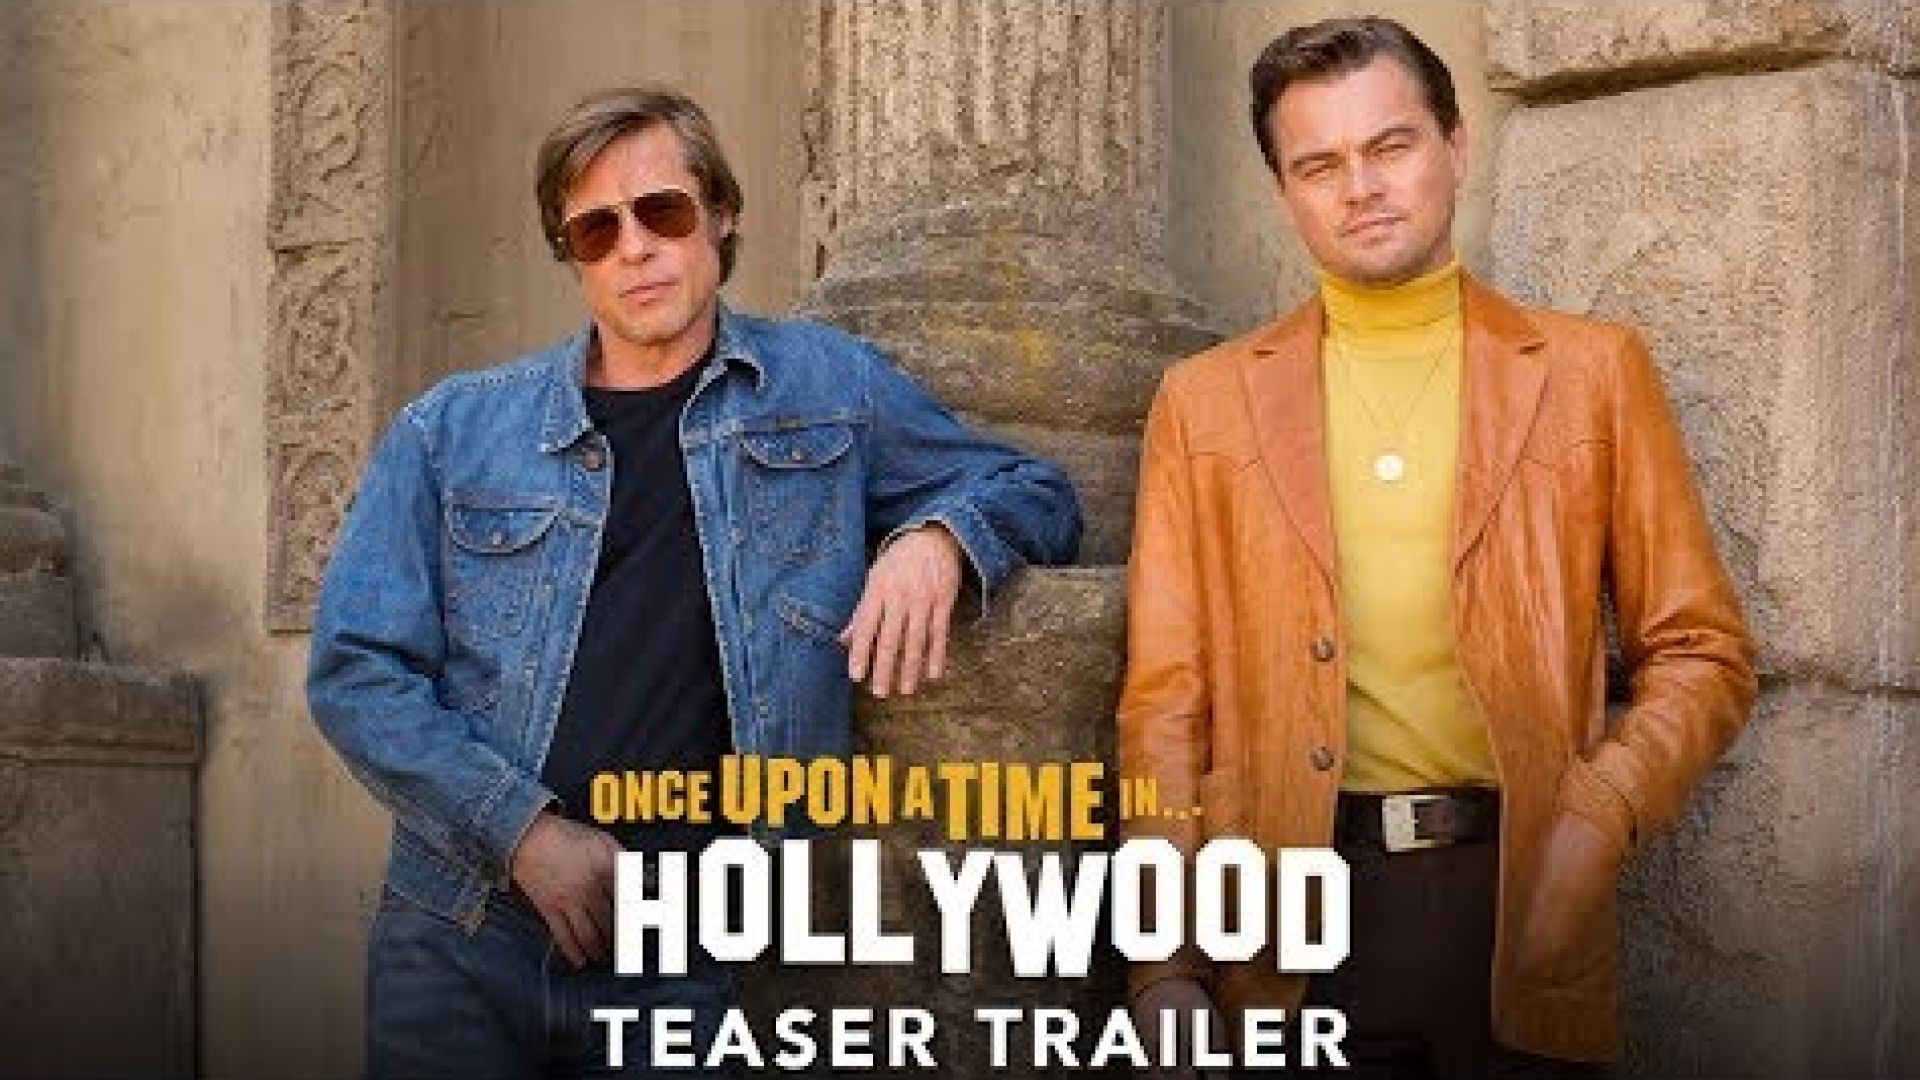 ‘Once Upon A Time In Hollywood’ Teaser Trailer